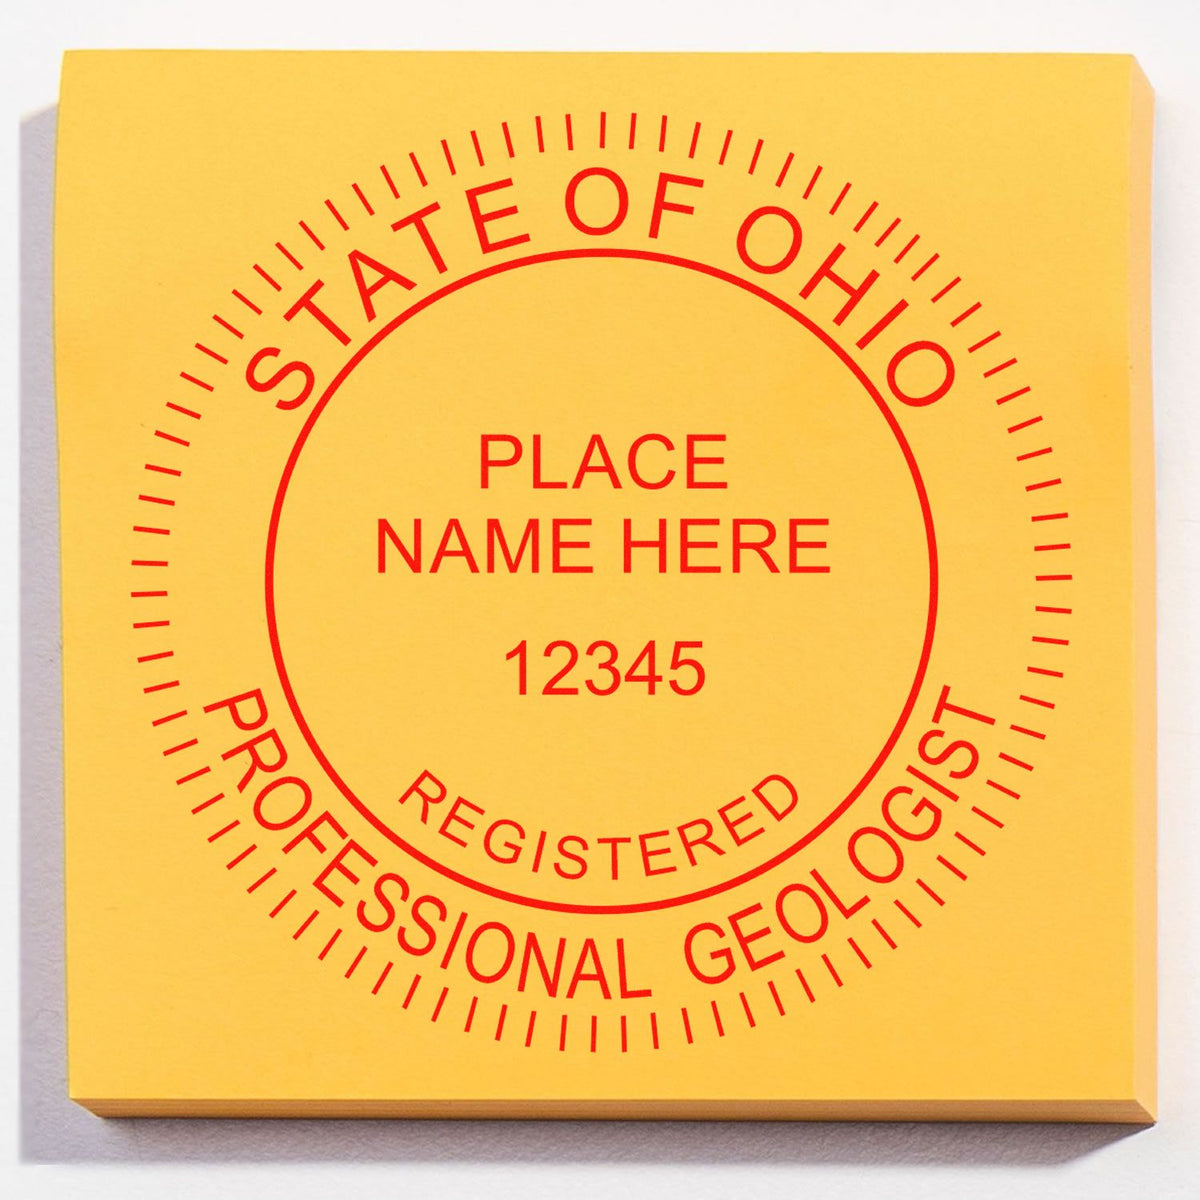 An in use photo of the Slim Pre-Inked Ohio Professional Geologist Seal Stamp showing a sample imprint on a cardstock